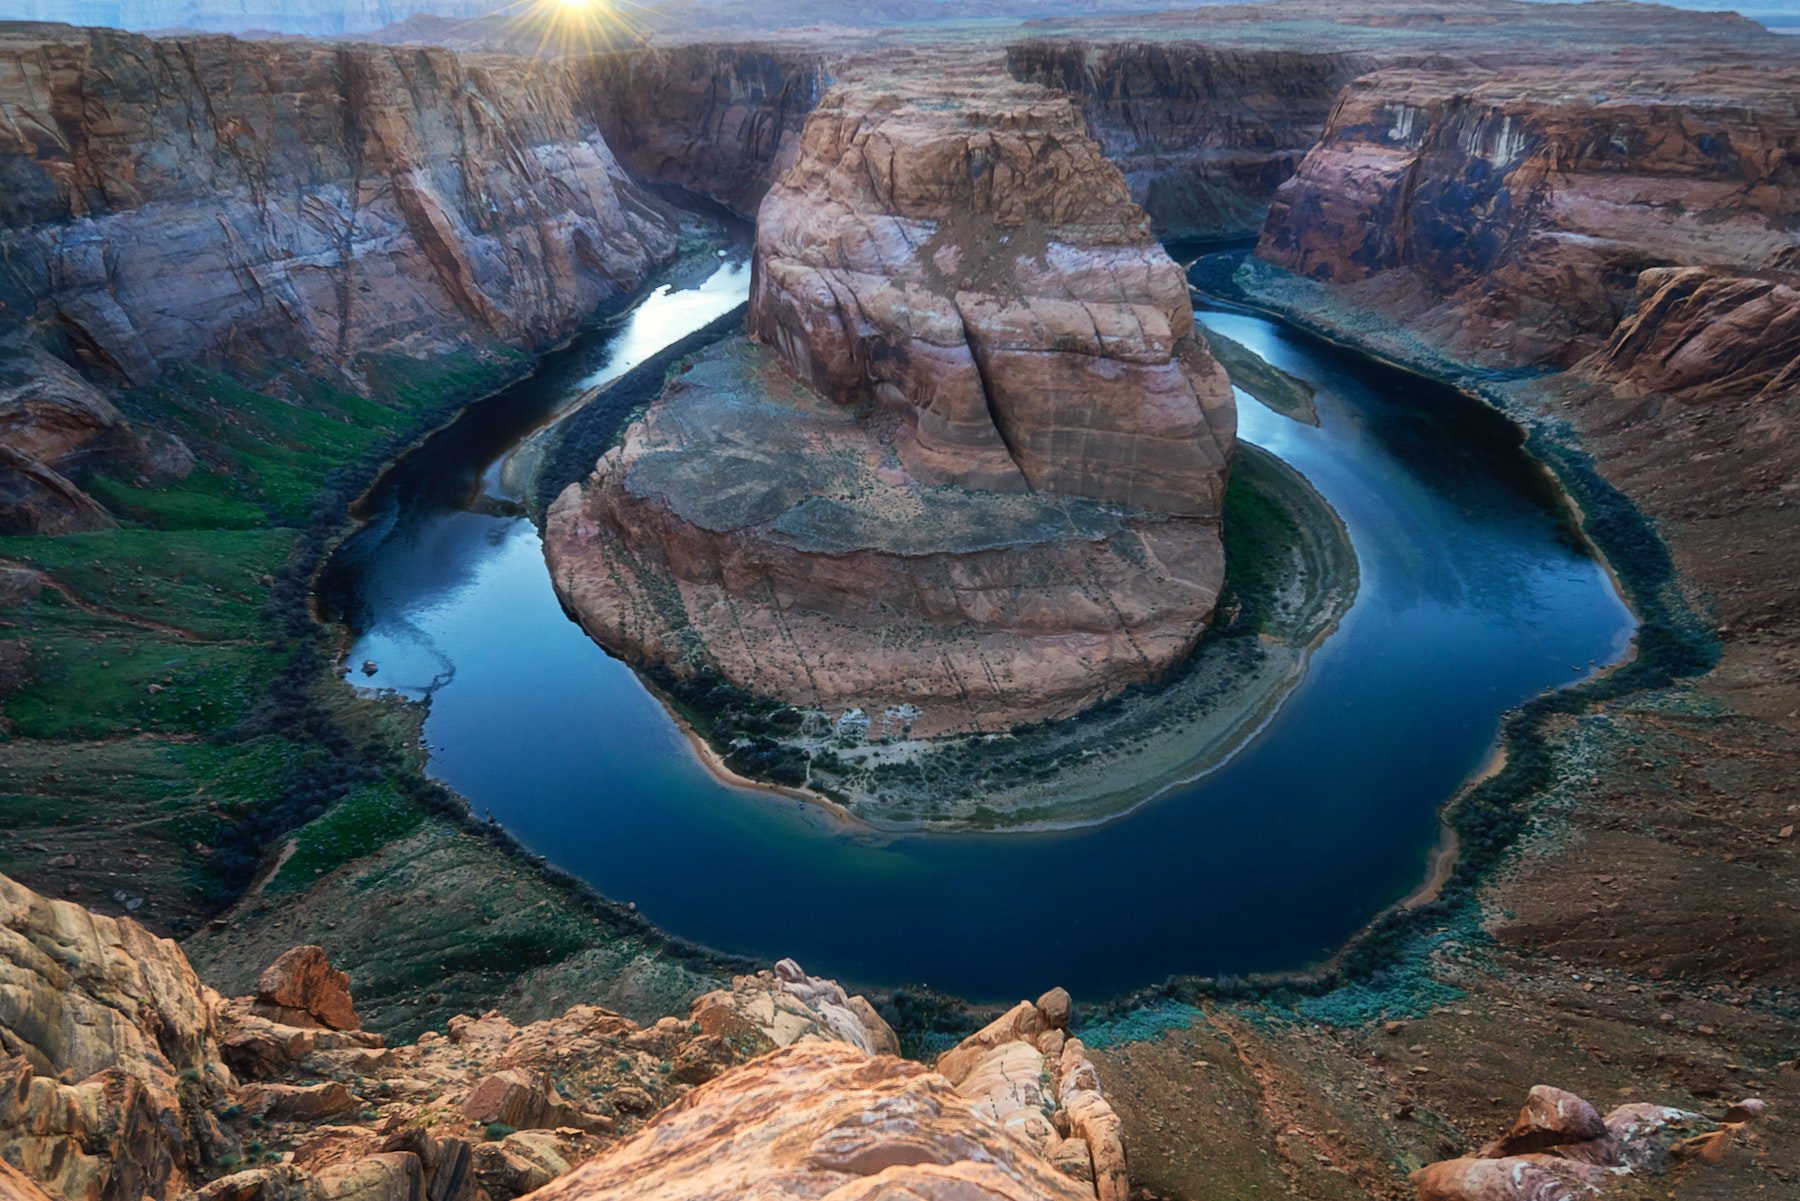 the well known river in a valley surrounded by towering red rock cliff at Horseshoe Bend, Arizona